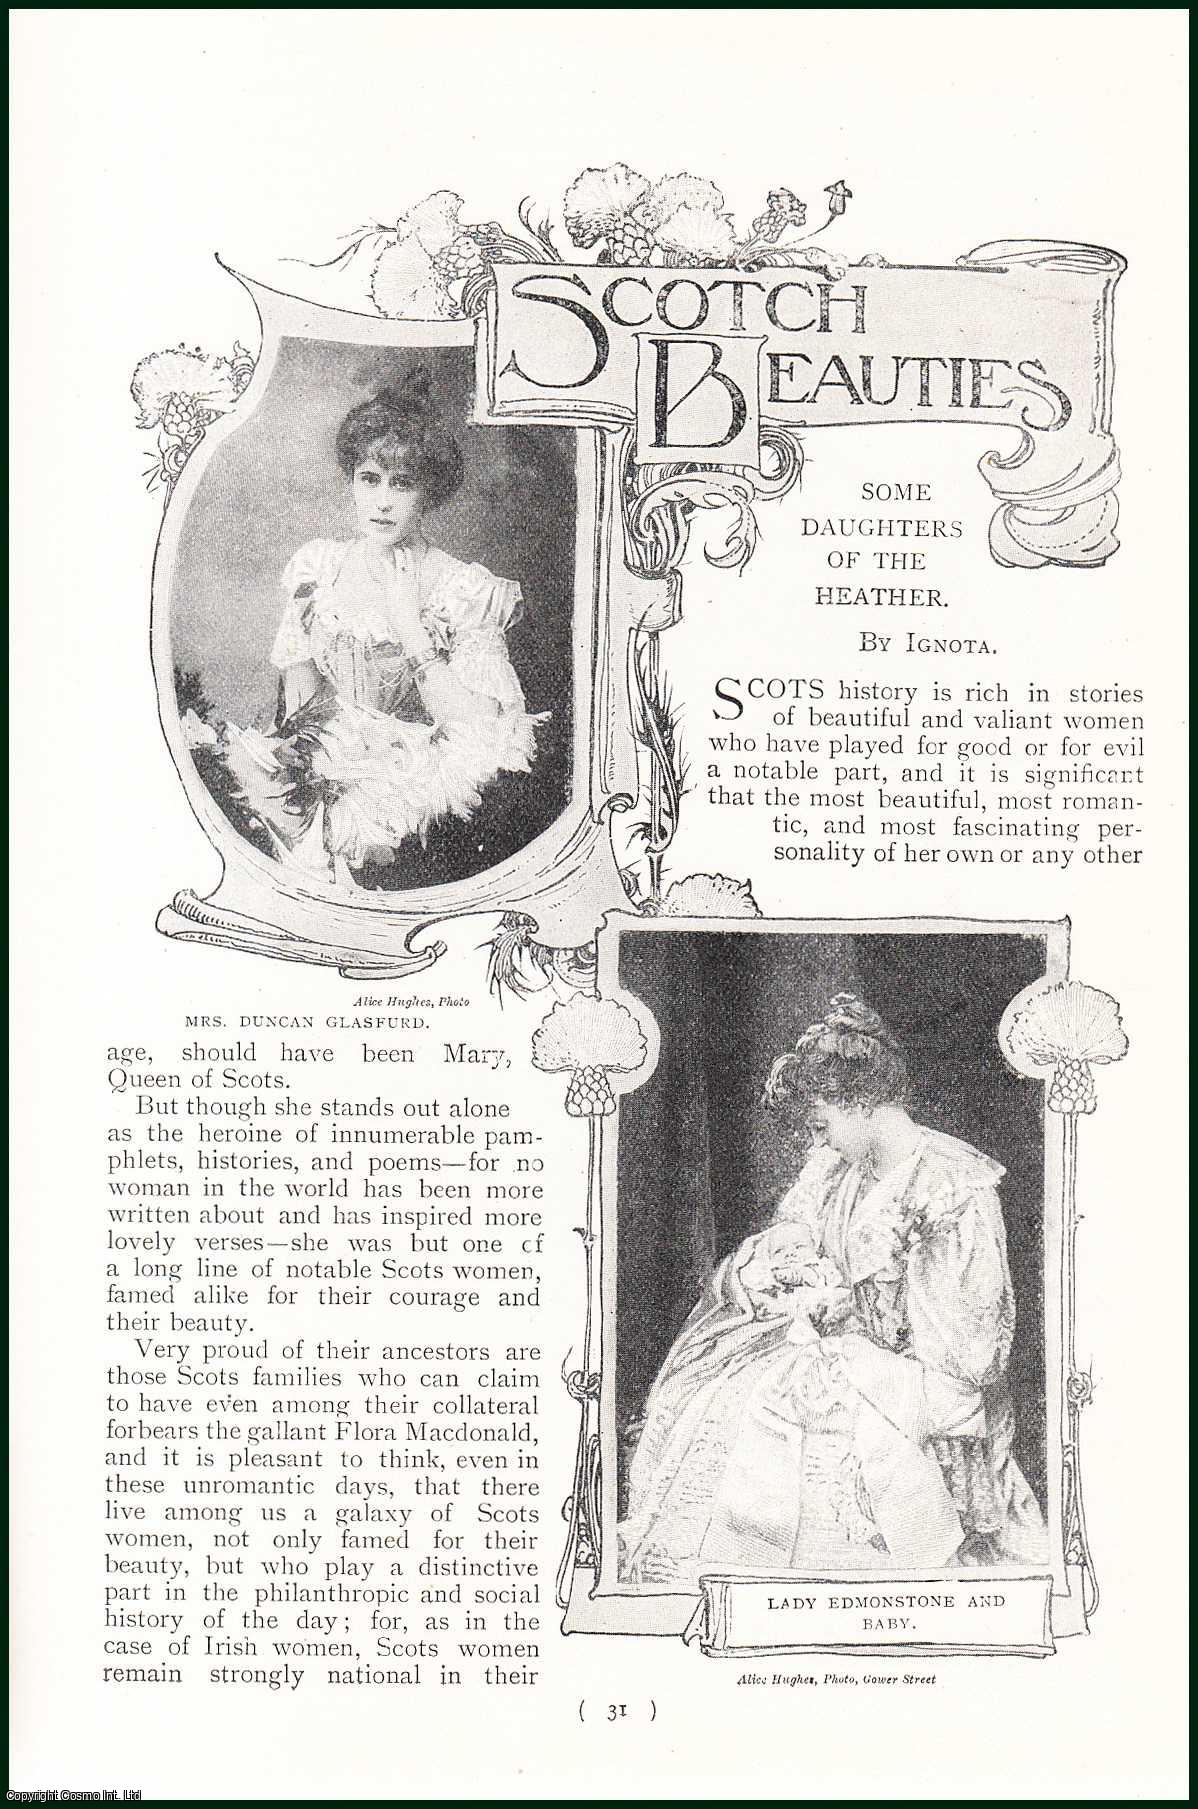 ---, --- - Scotch Beauties. Some Daughters of the Heather. A rare original article from the Harmsworth London Magazine, 1900.